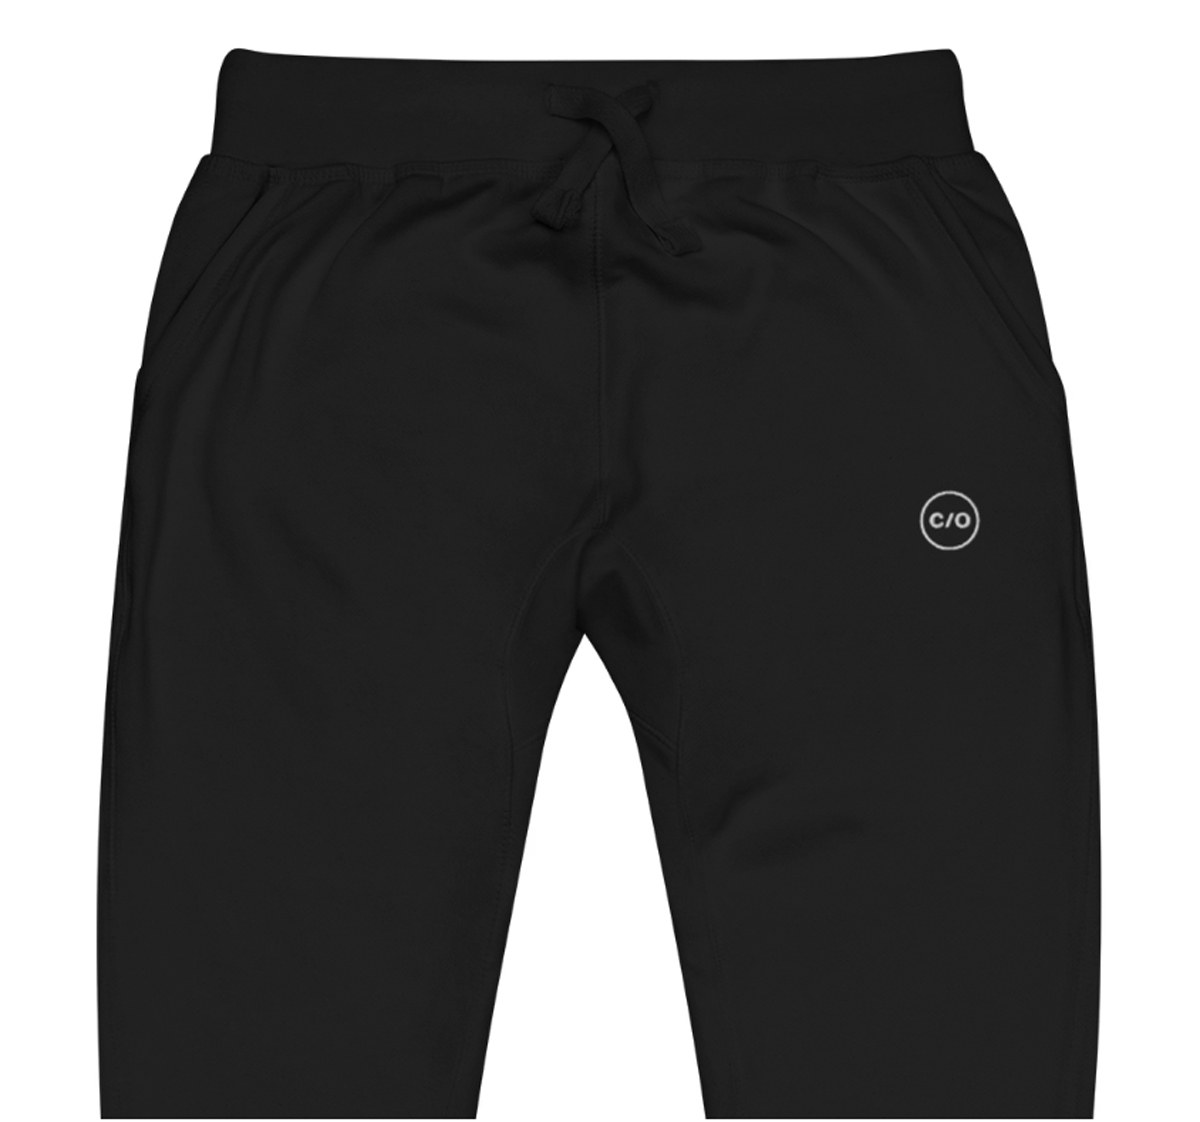 Neue Supply Co. Women's Performance Jogger in Black